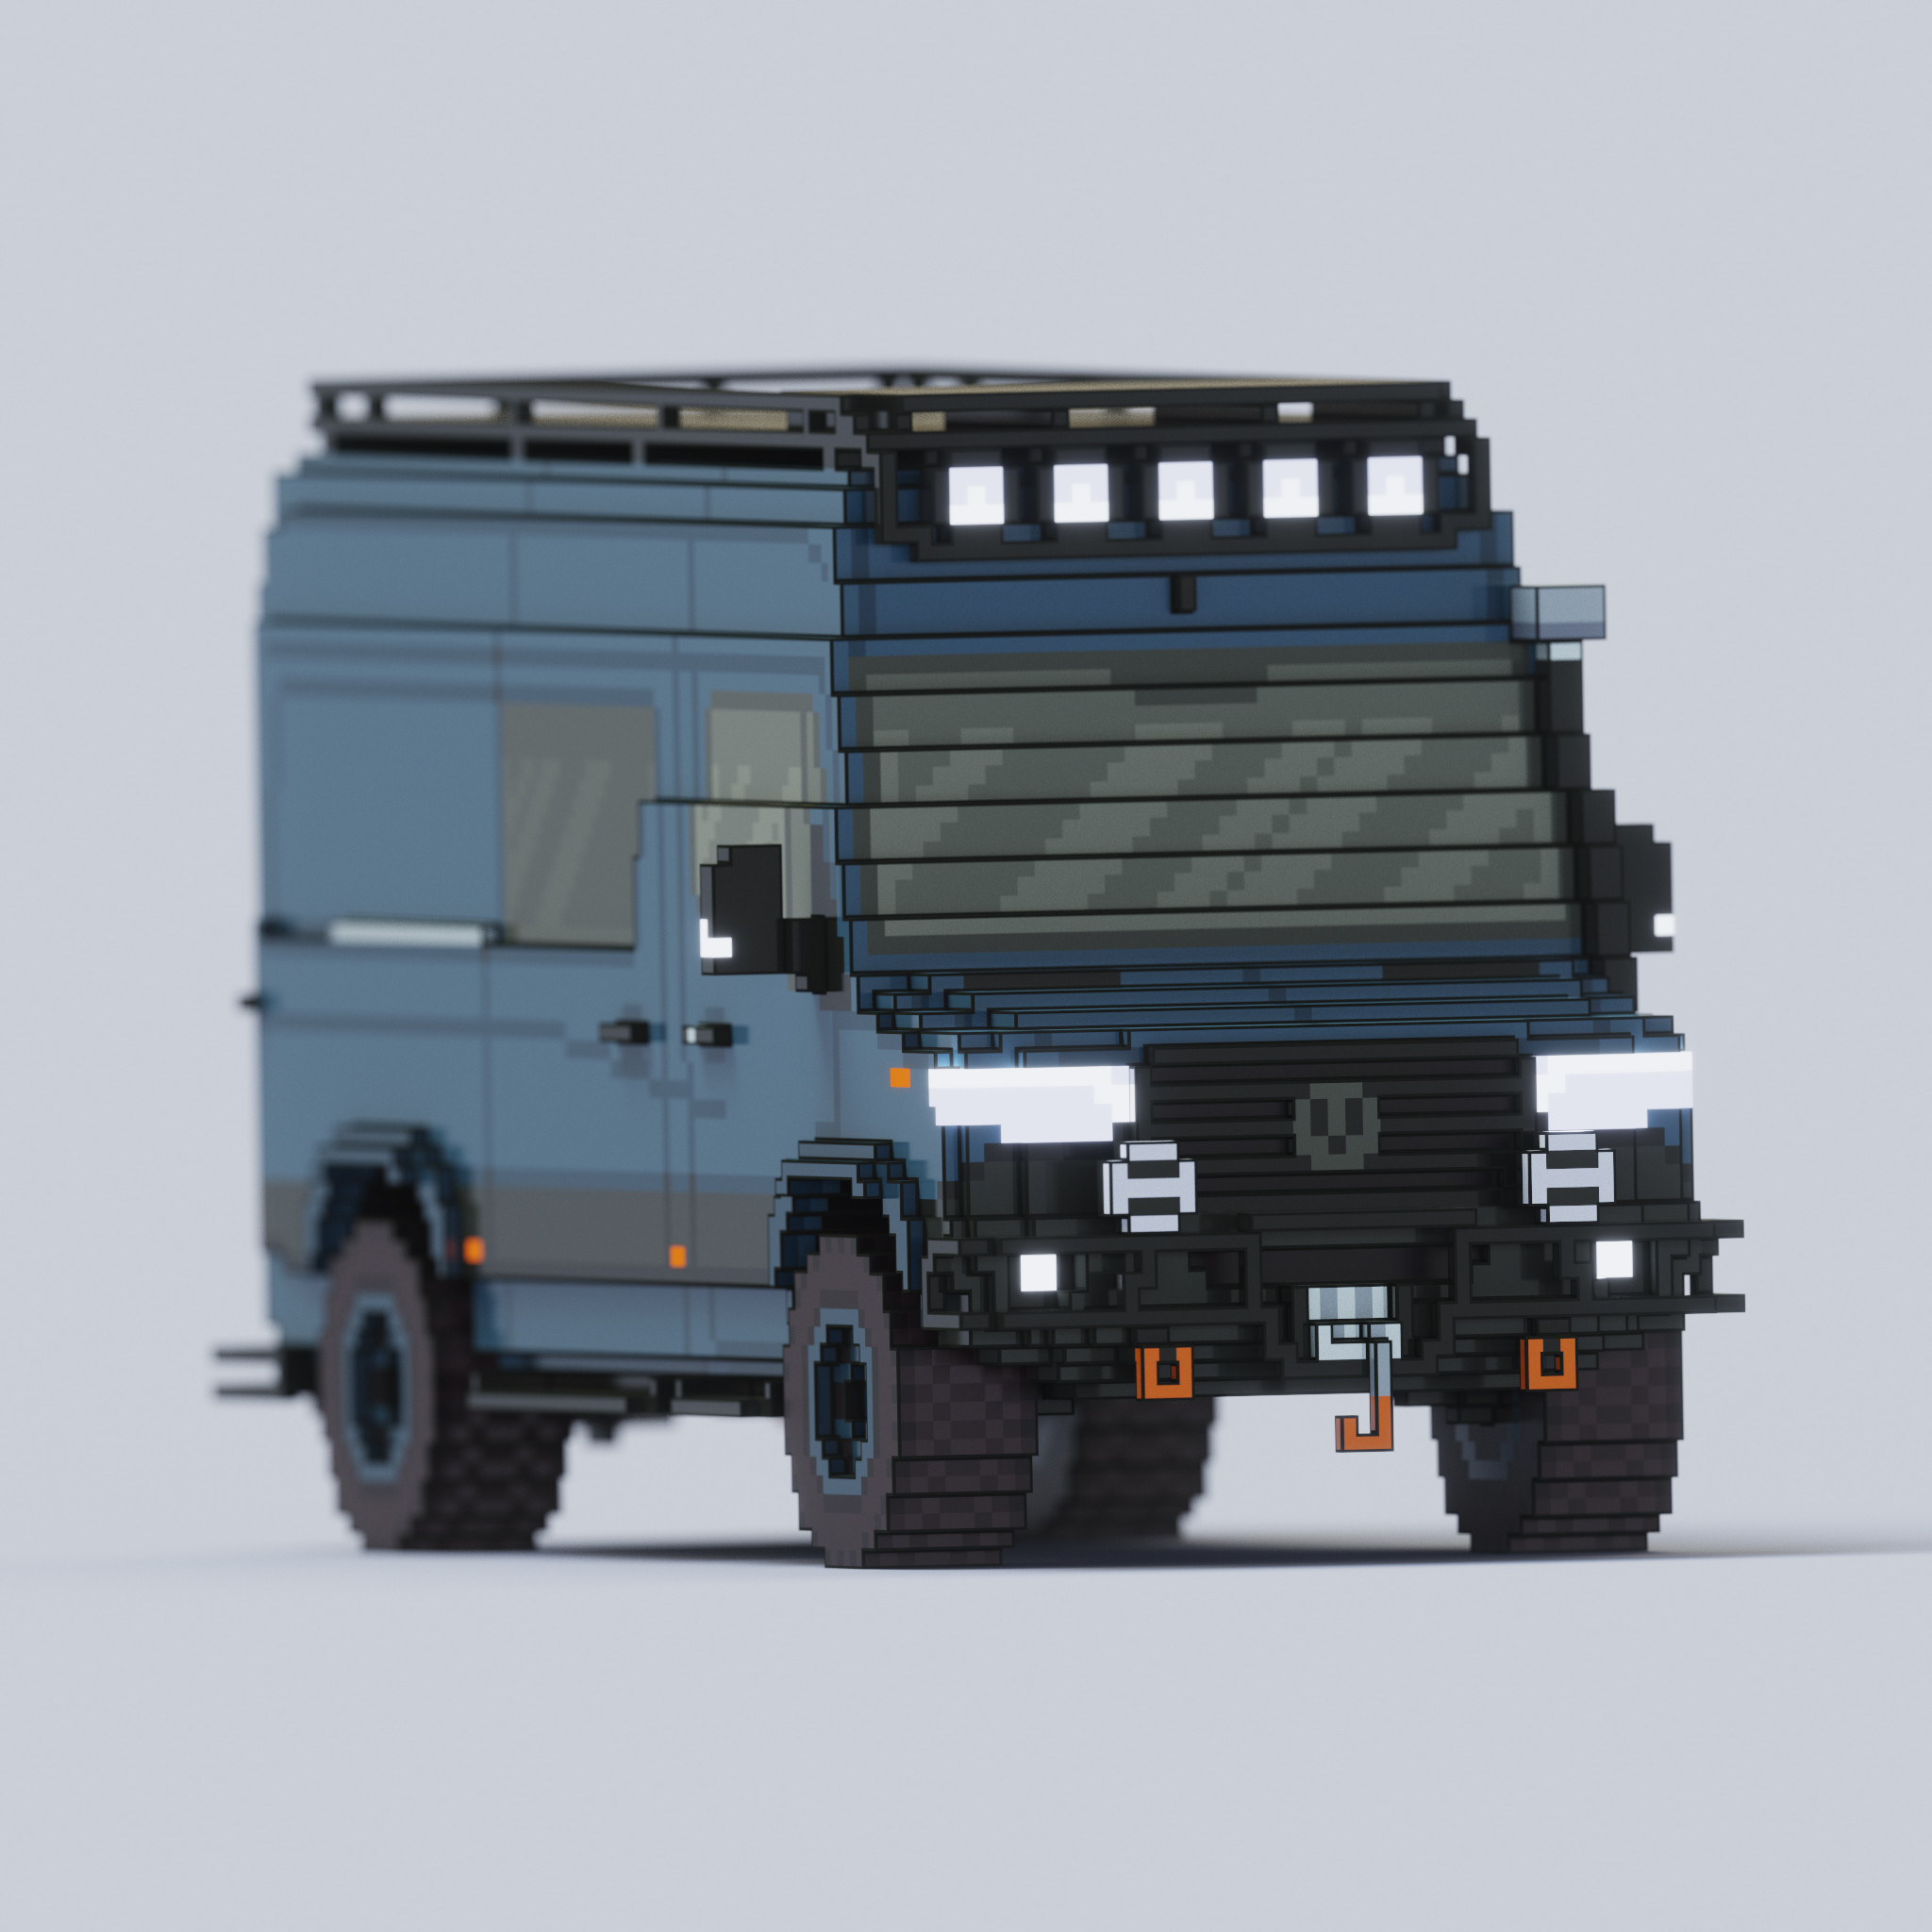 Close up of the voxel Sprinter Van focusing on the front grill and bumper elements.